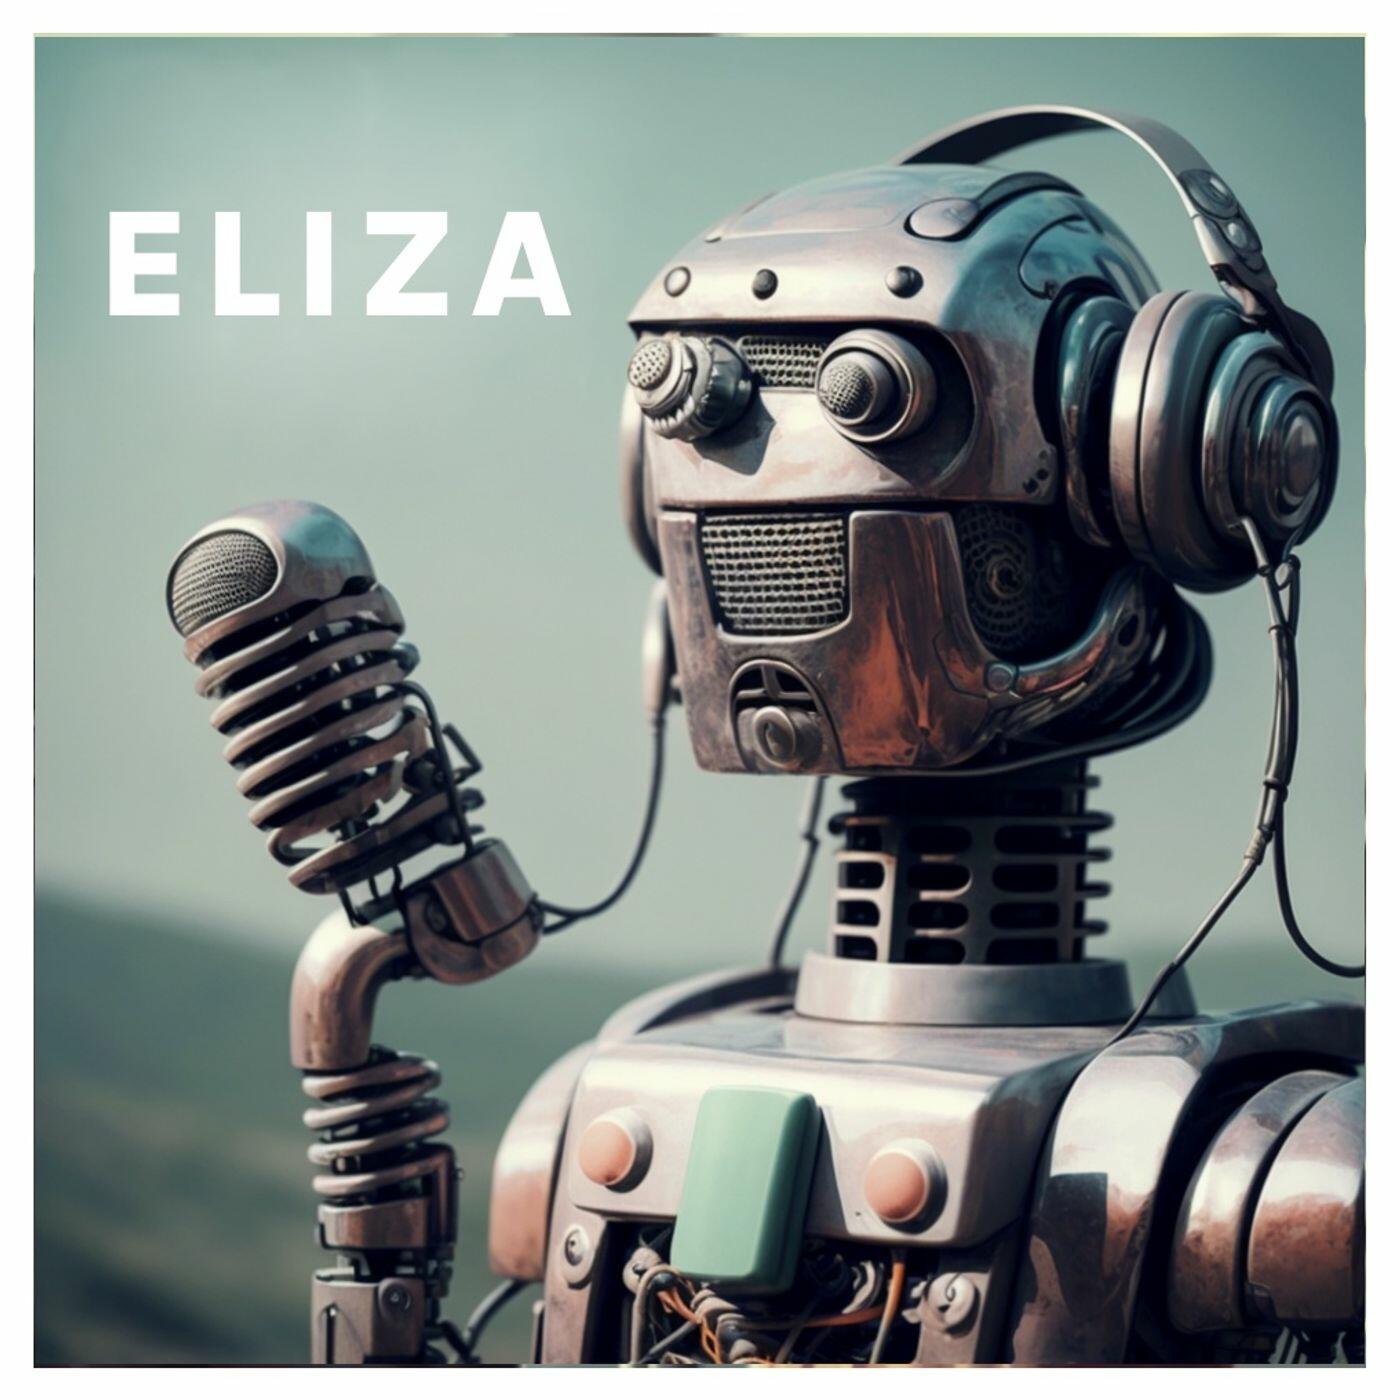 anmodning Vild Standard Eliza - The Beyond AI Podcast | iHeart